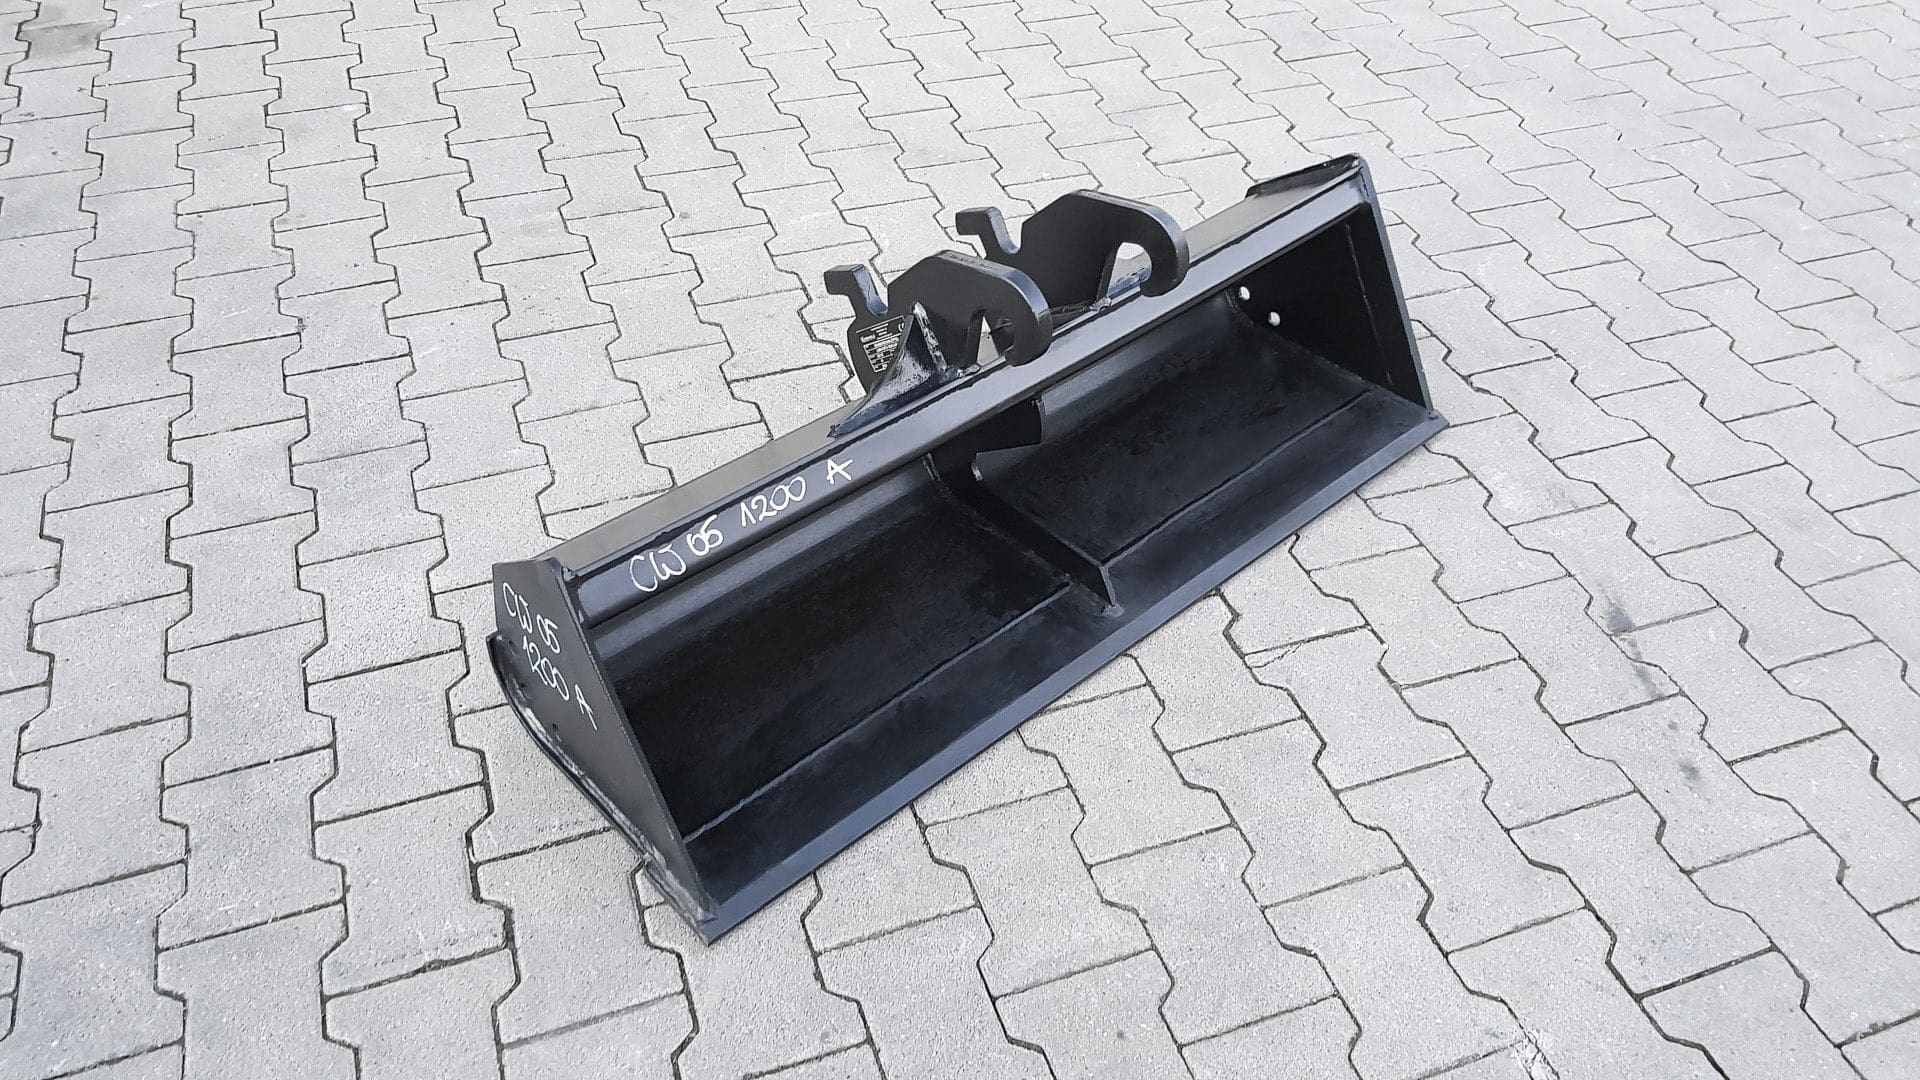 Ditch cleaning bucket suitable for Verachtert CW05 / 1200 mm / cat. 2K